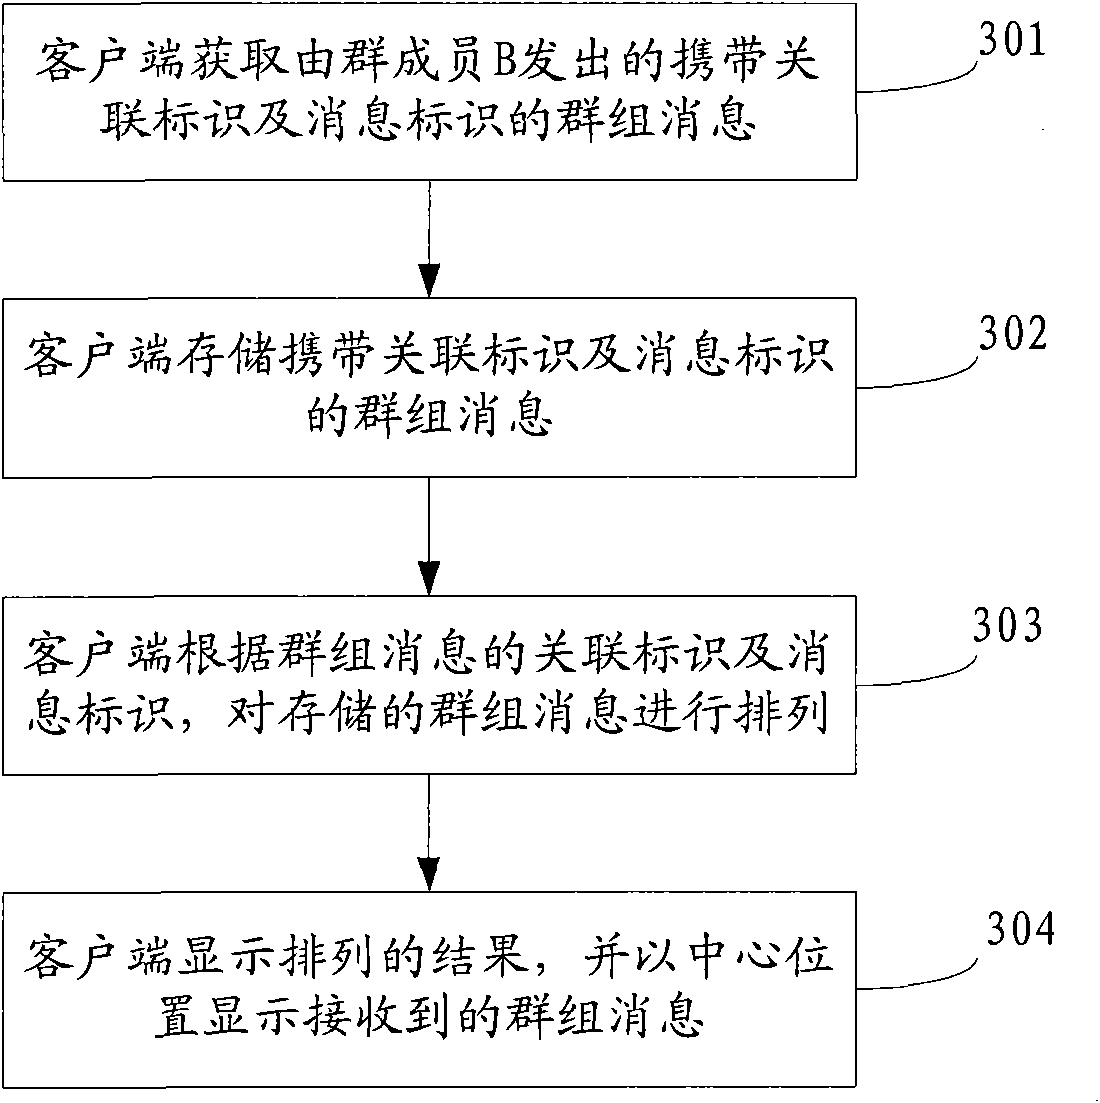 Group message managing method and apparatus